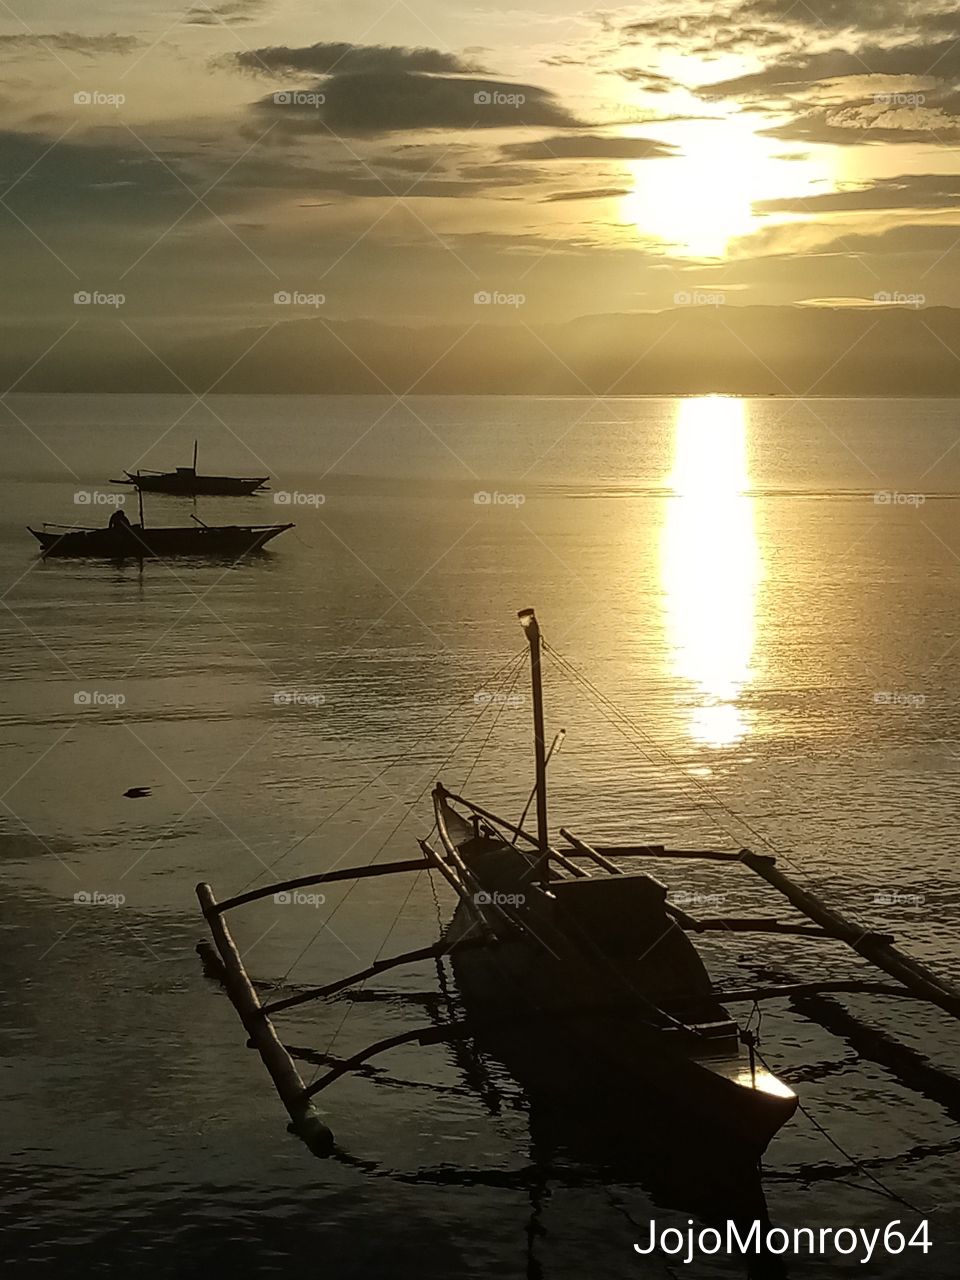 Fisherman's View of the Sunrise